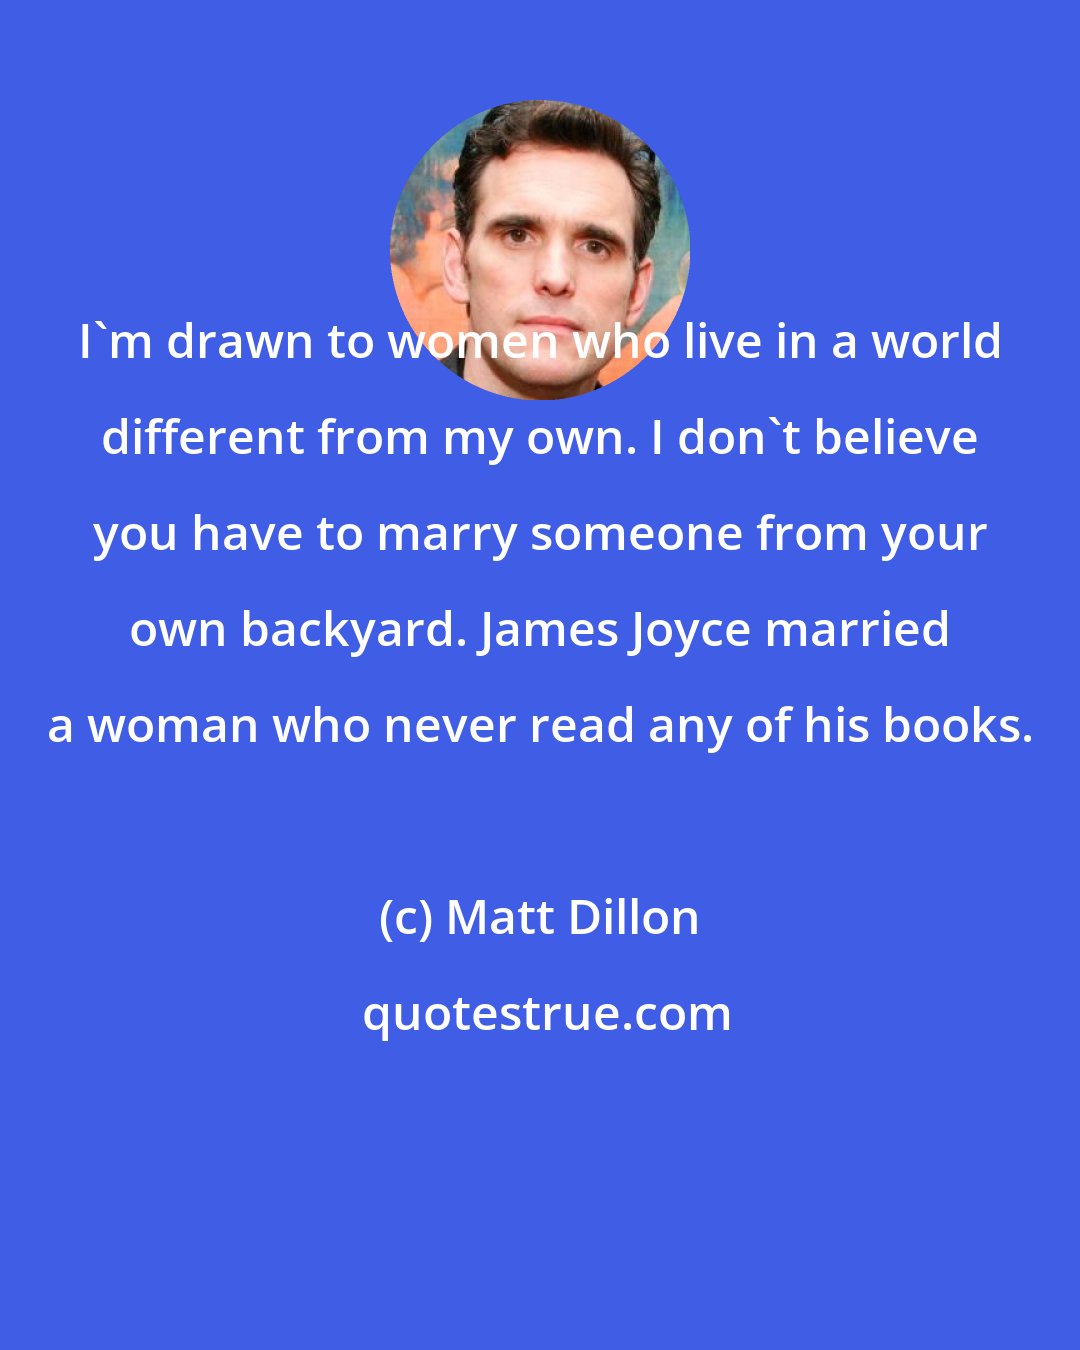 Matt Dillon: I'm drawn to women who live in a world different from my own. I don't believe you have to marry someone from your own backyard. James Joyce married a woman who never read any of his books.